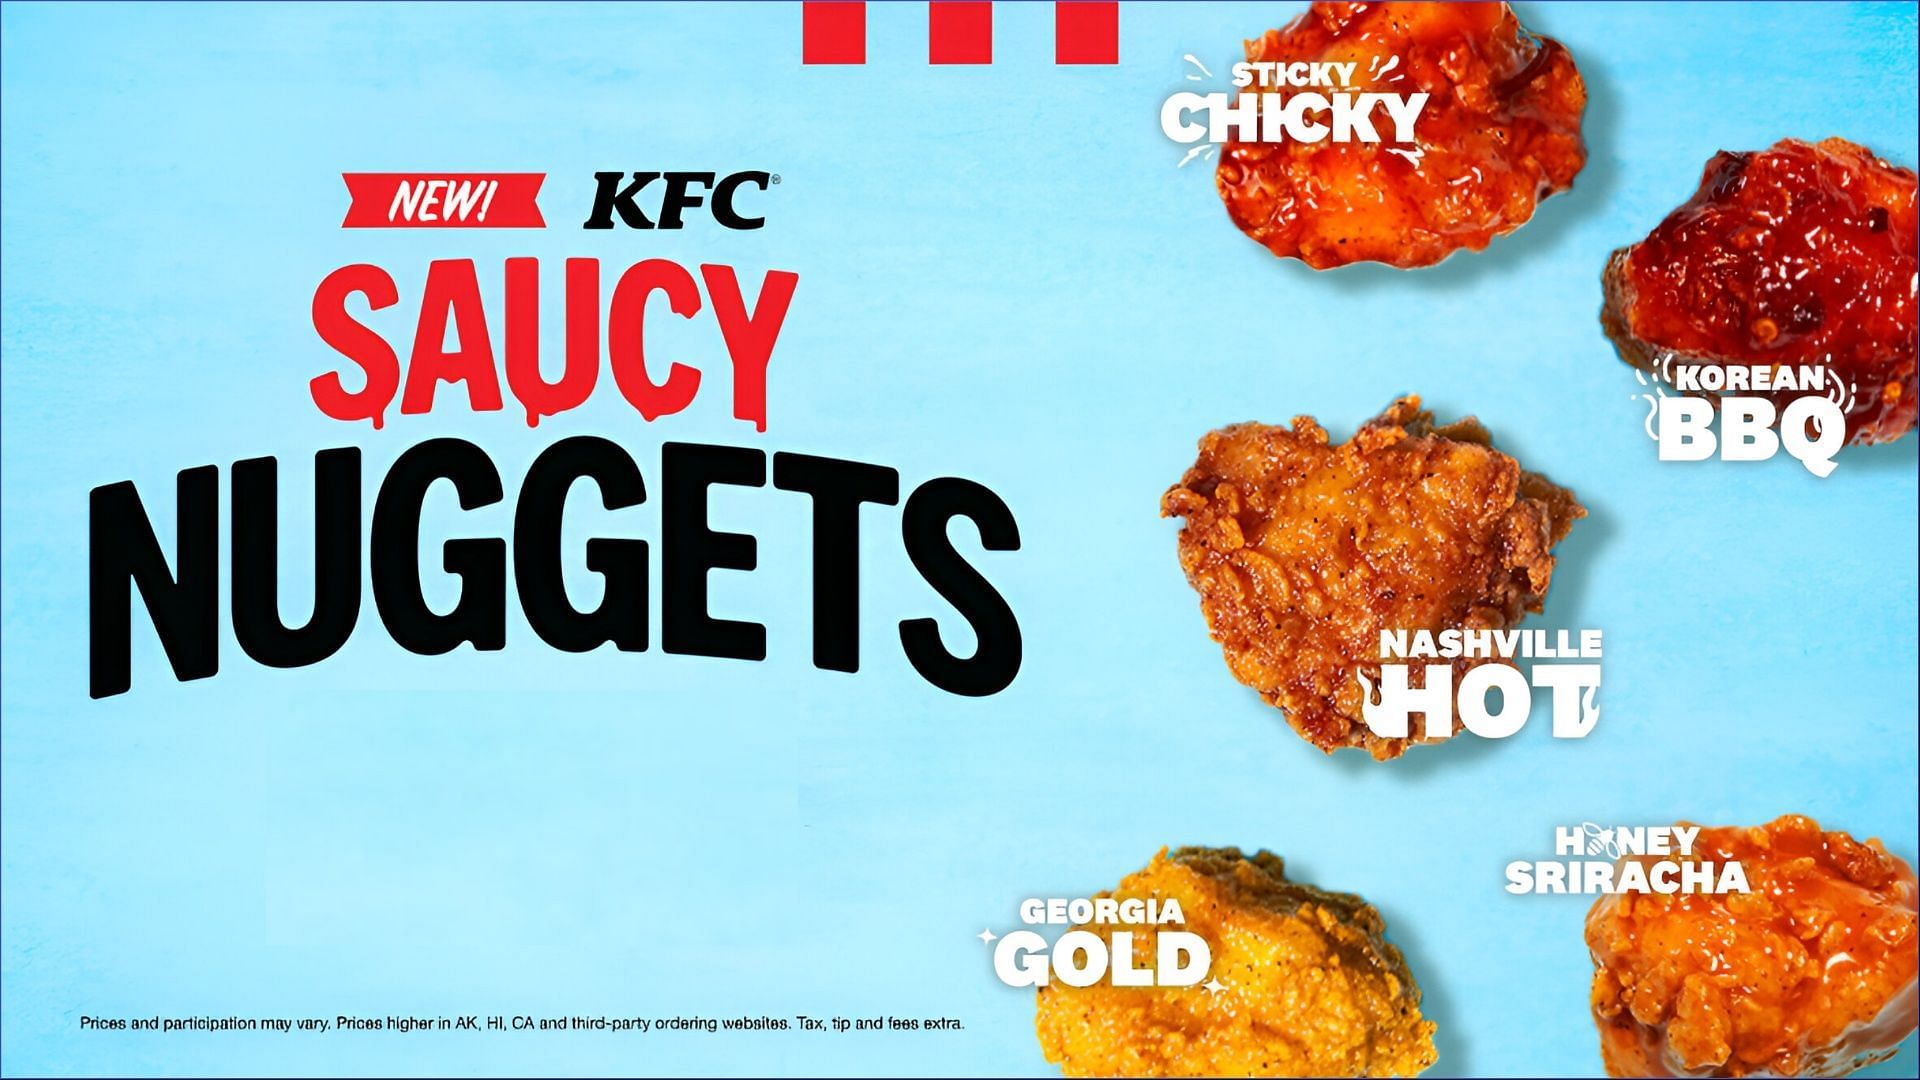 KFC introduces five saucy flavors of hand-breaded chicken nuggets (Image via Yum Brands / KFC)